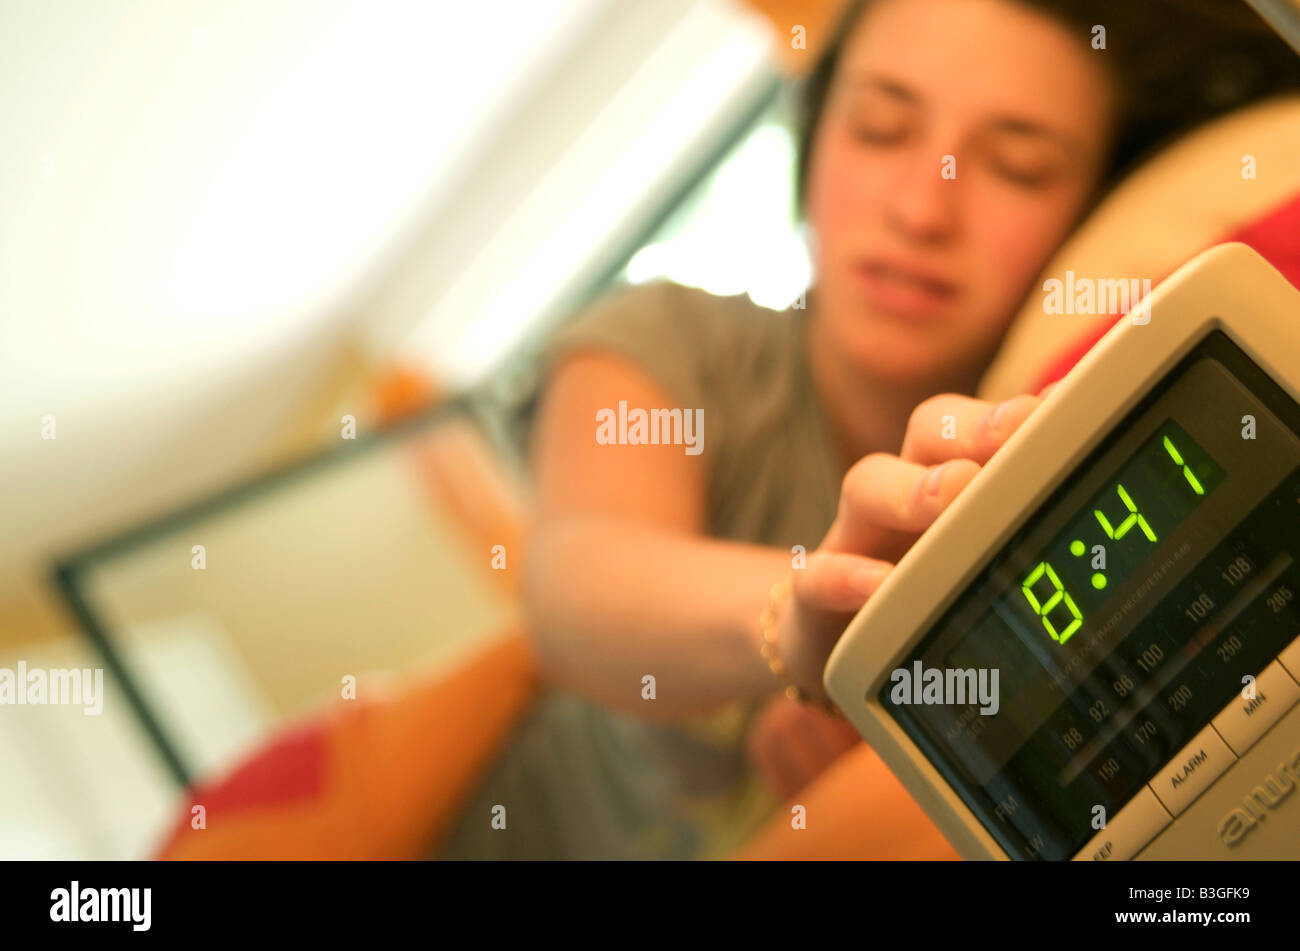 A young woman / teenager woken up in bed by her alarm clock turning it off Stock Photo